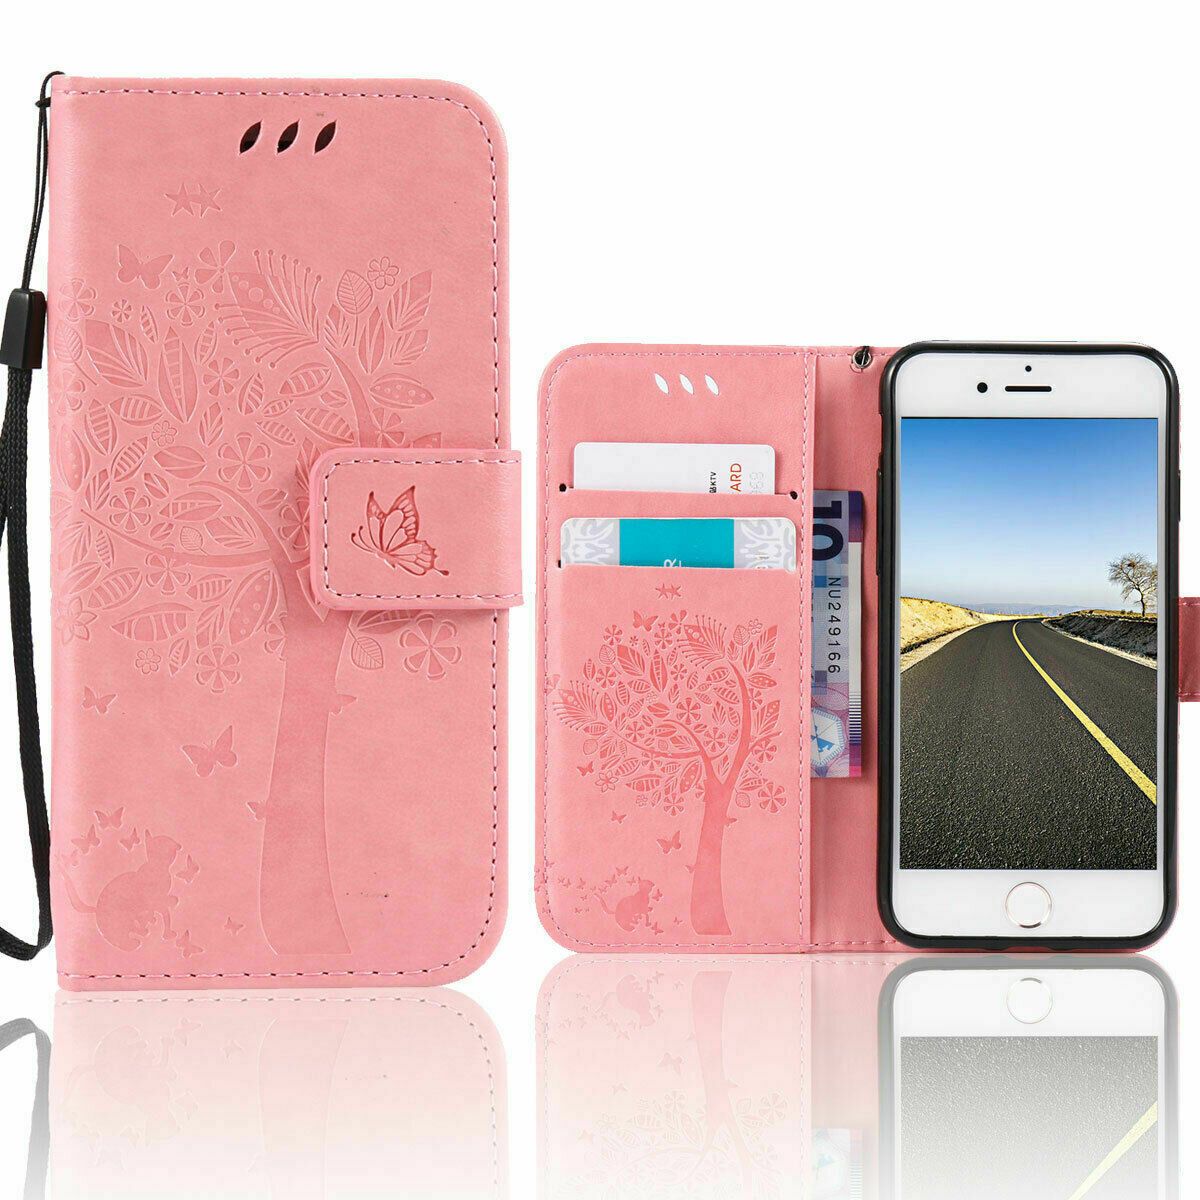 Magnetic Leather Wallet Case For iPhone 8 7 6s Plus X XS MAX XR Flip Cover Stand stekim-92 Pink iPhone6/6S 